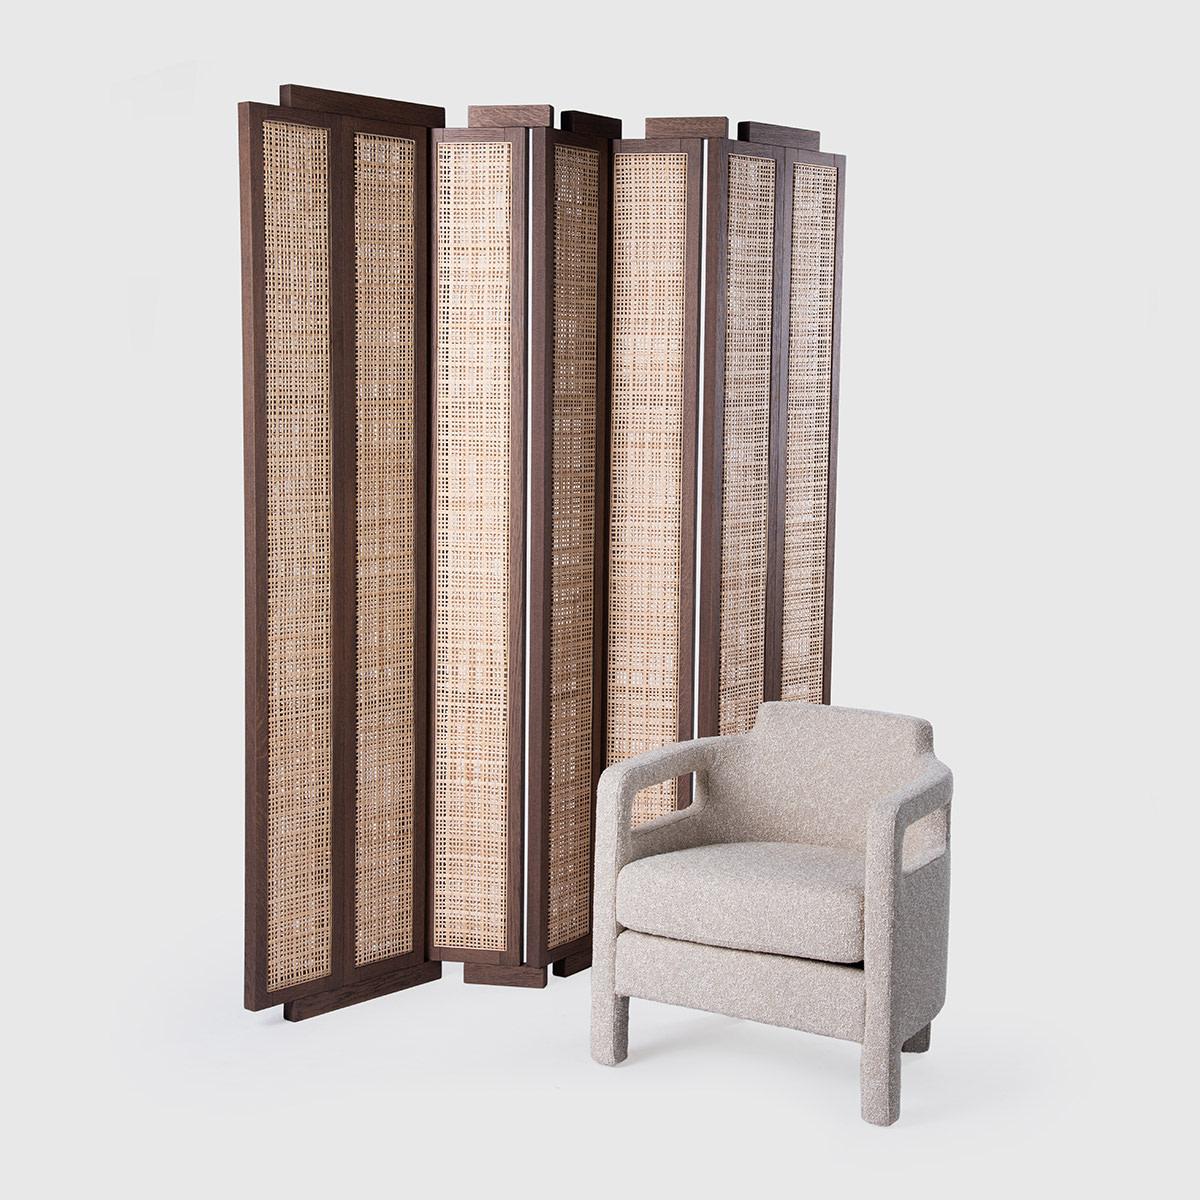 Organic Modern Contemporary Screen 'Henley Street' by Man of Parts, Nude Oak & Cane For Sale